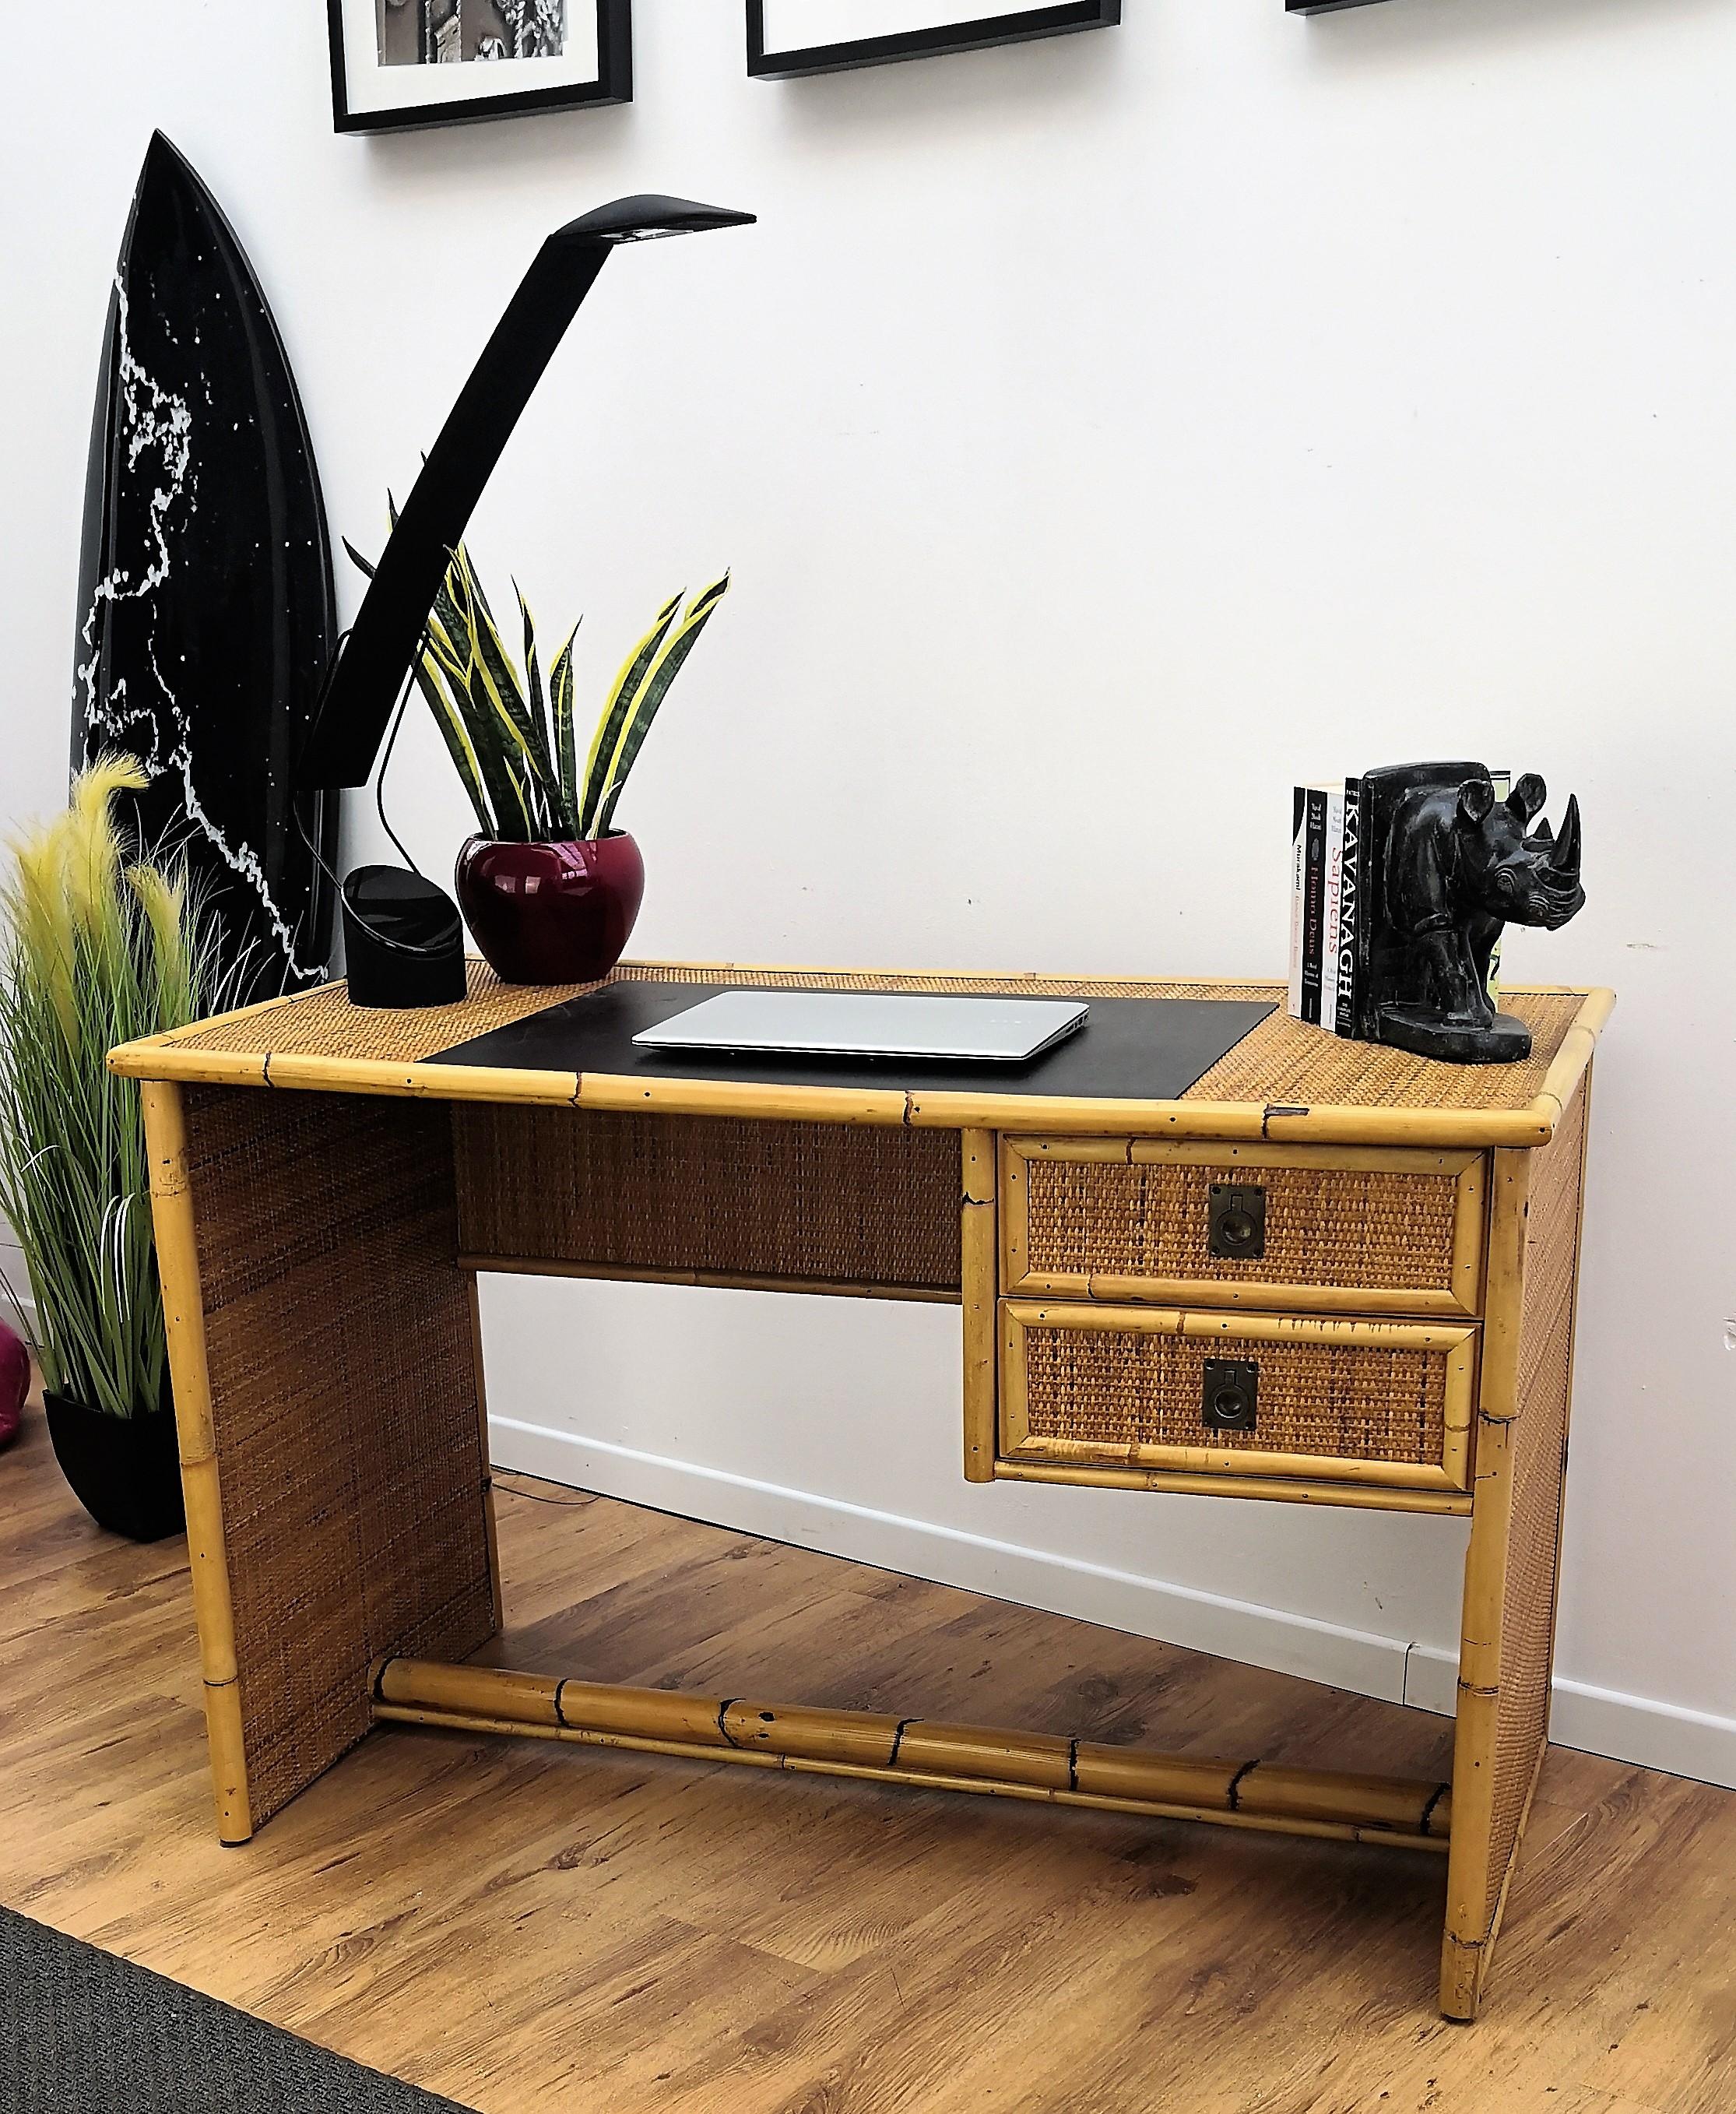 Beautiful 1960s Italian Mid-Century Modern writing table or desk in bamboo and wicker rattan with 2 side drawers with typical brass handles from renowned Dal Vera manufacturer. The organic beauty of the woven materials is timeless and classic,